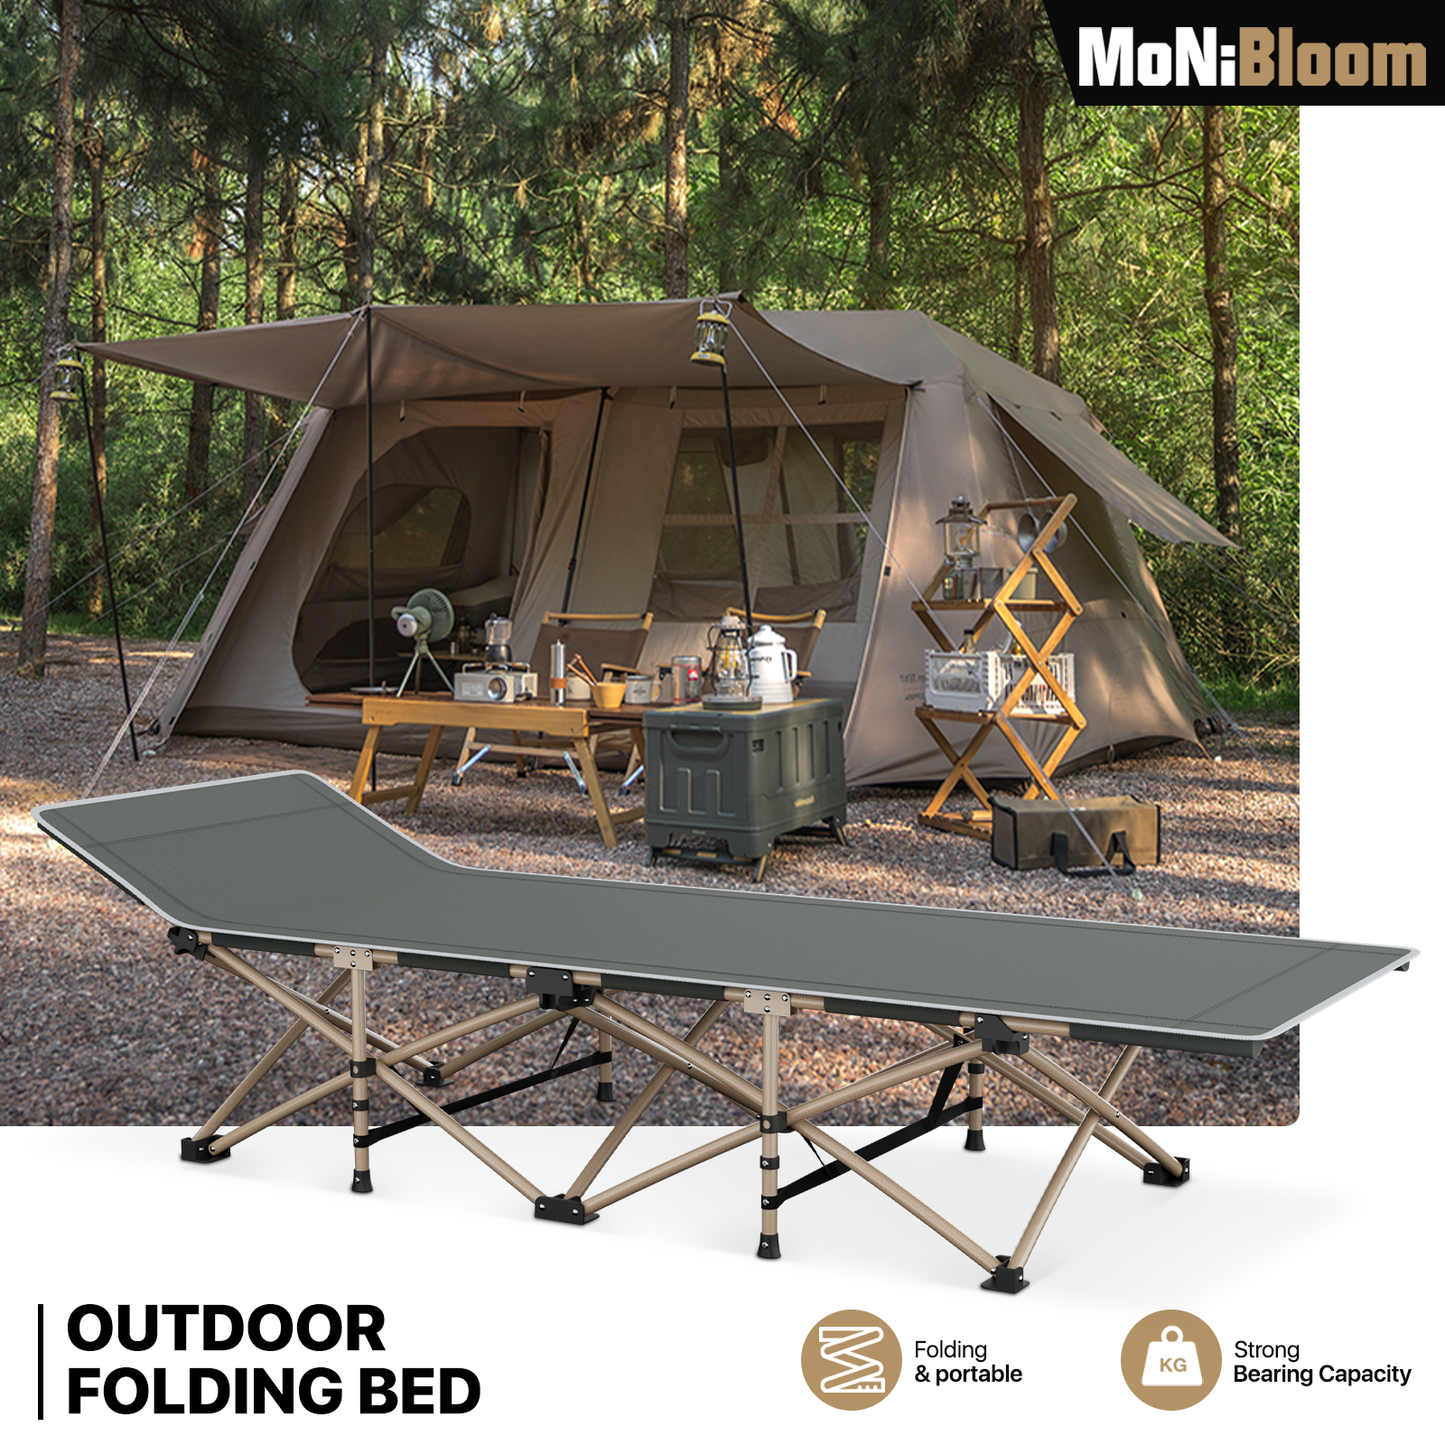 Oxford Foldable Military Cot Porable Reclinable Camping Bed - Aluminum Frame